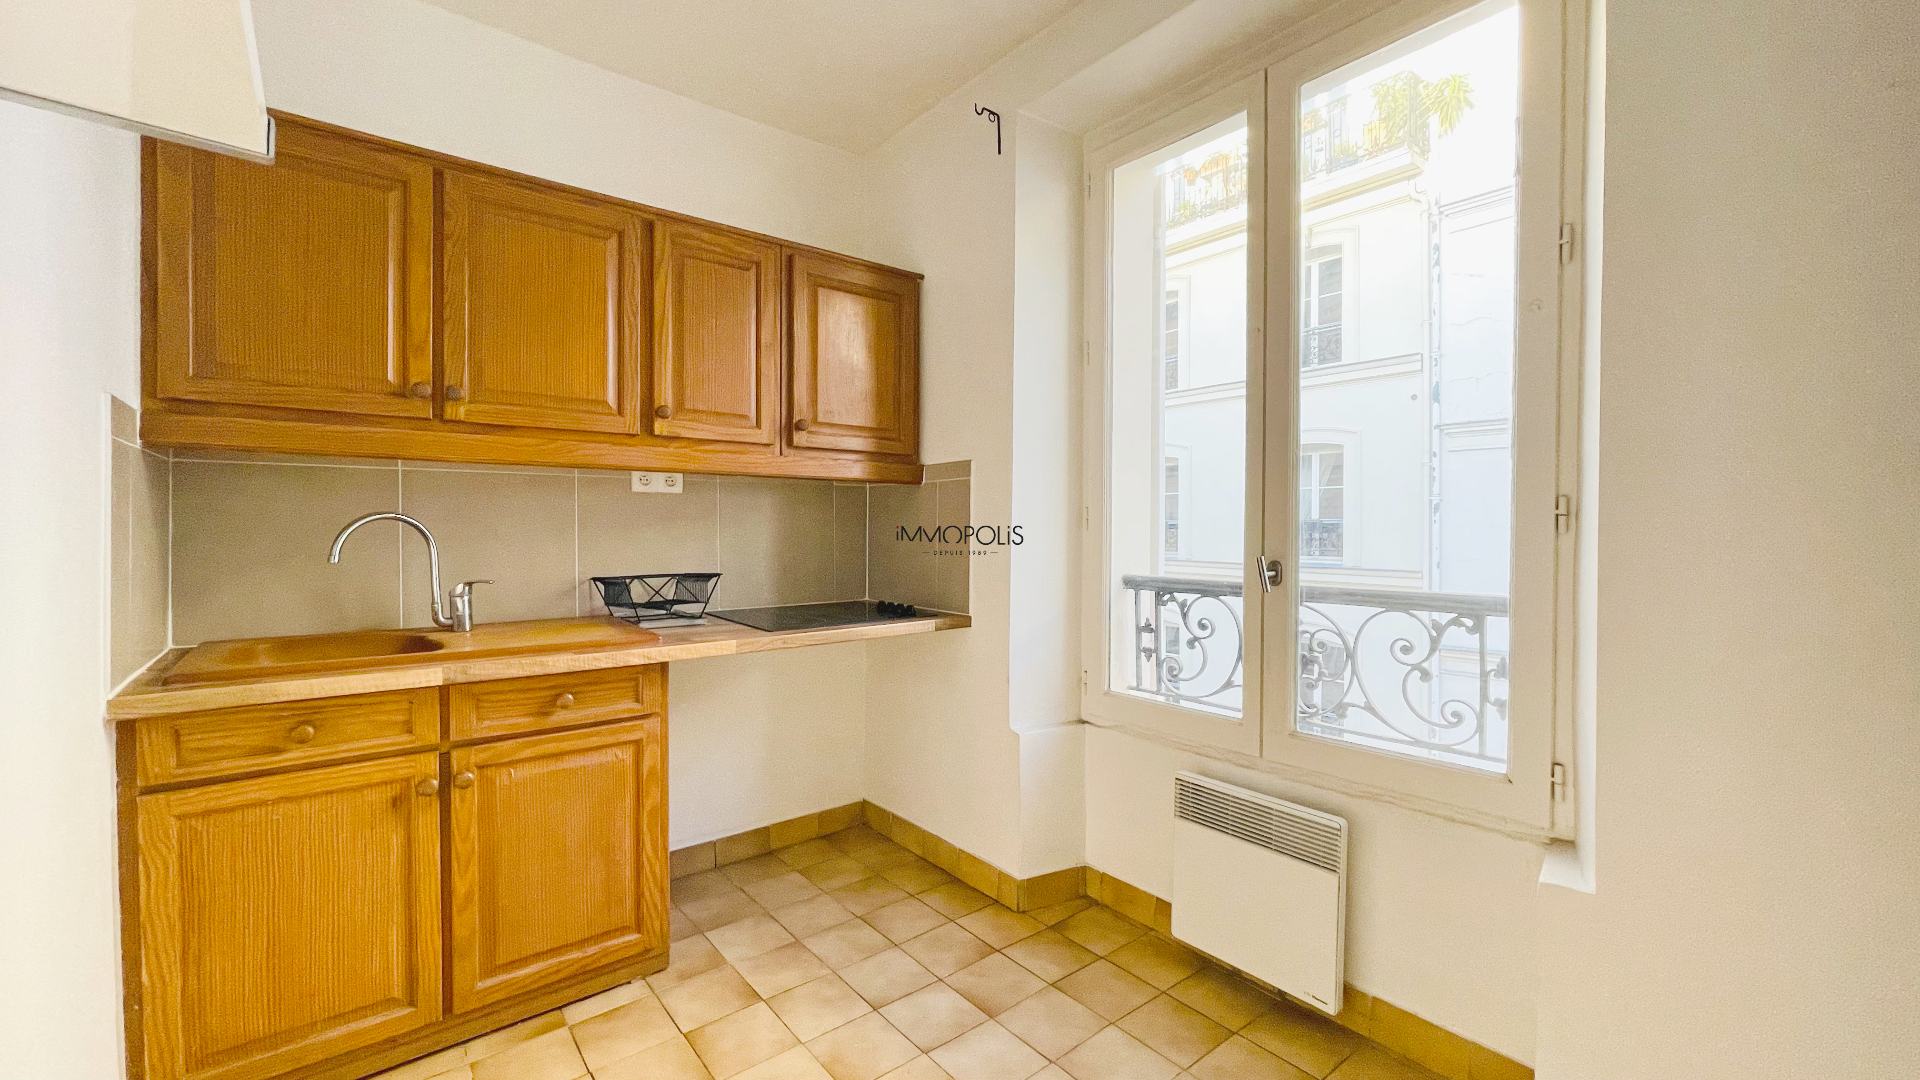 Beautiful studio in Montmartre, 30 m² without loss of space located in a rebuilded building 4